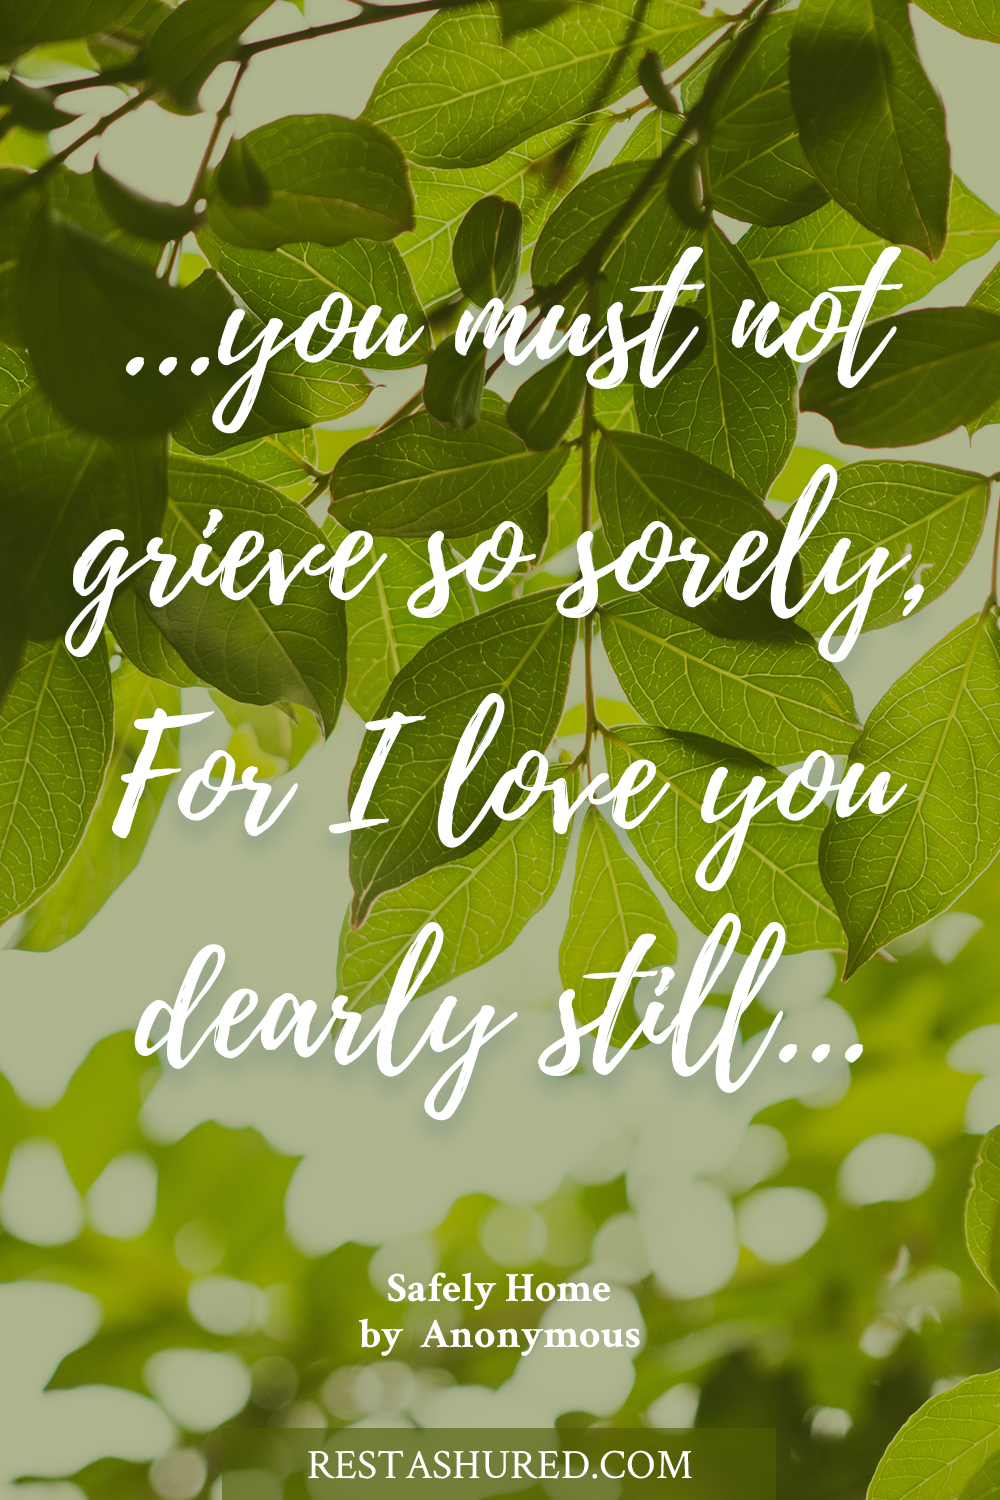 Photo of quote, reading, you must not grieve so sorely, For I love you dearly still...